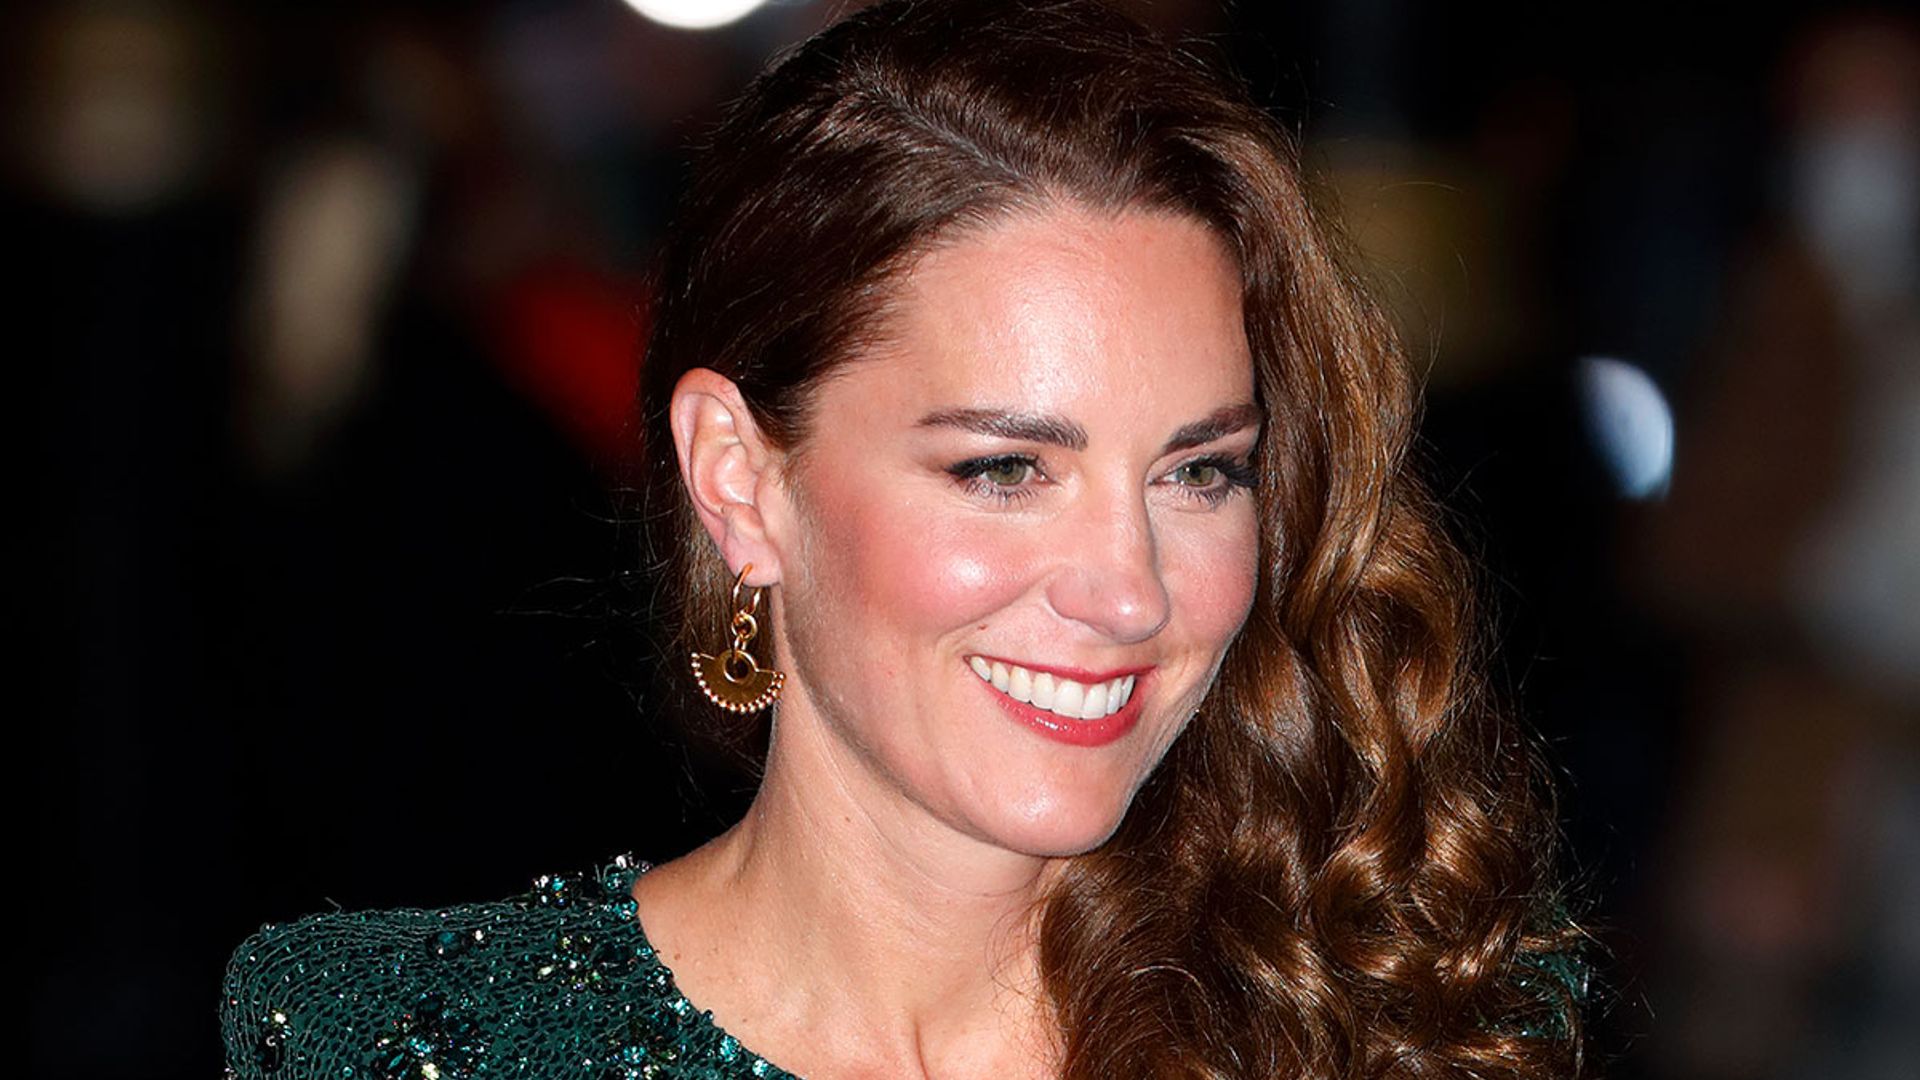 Kate Middleton's major hair transformation and new look explained